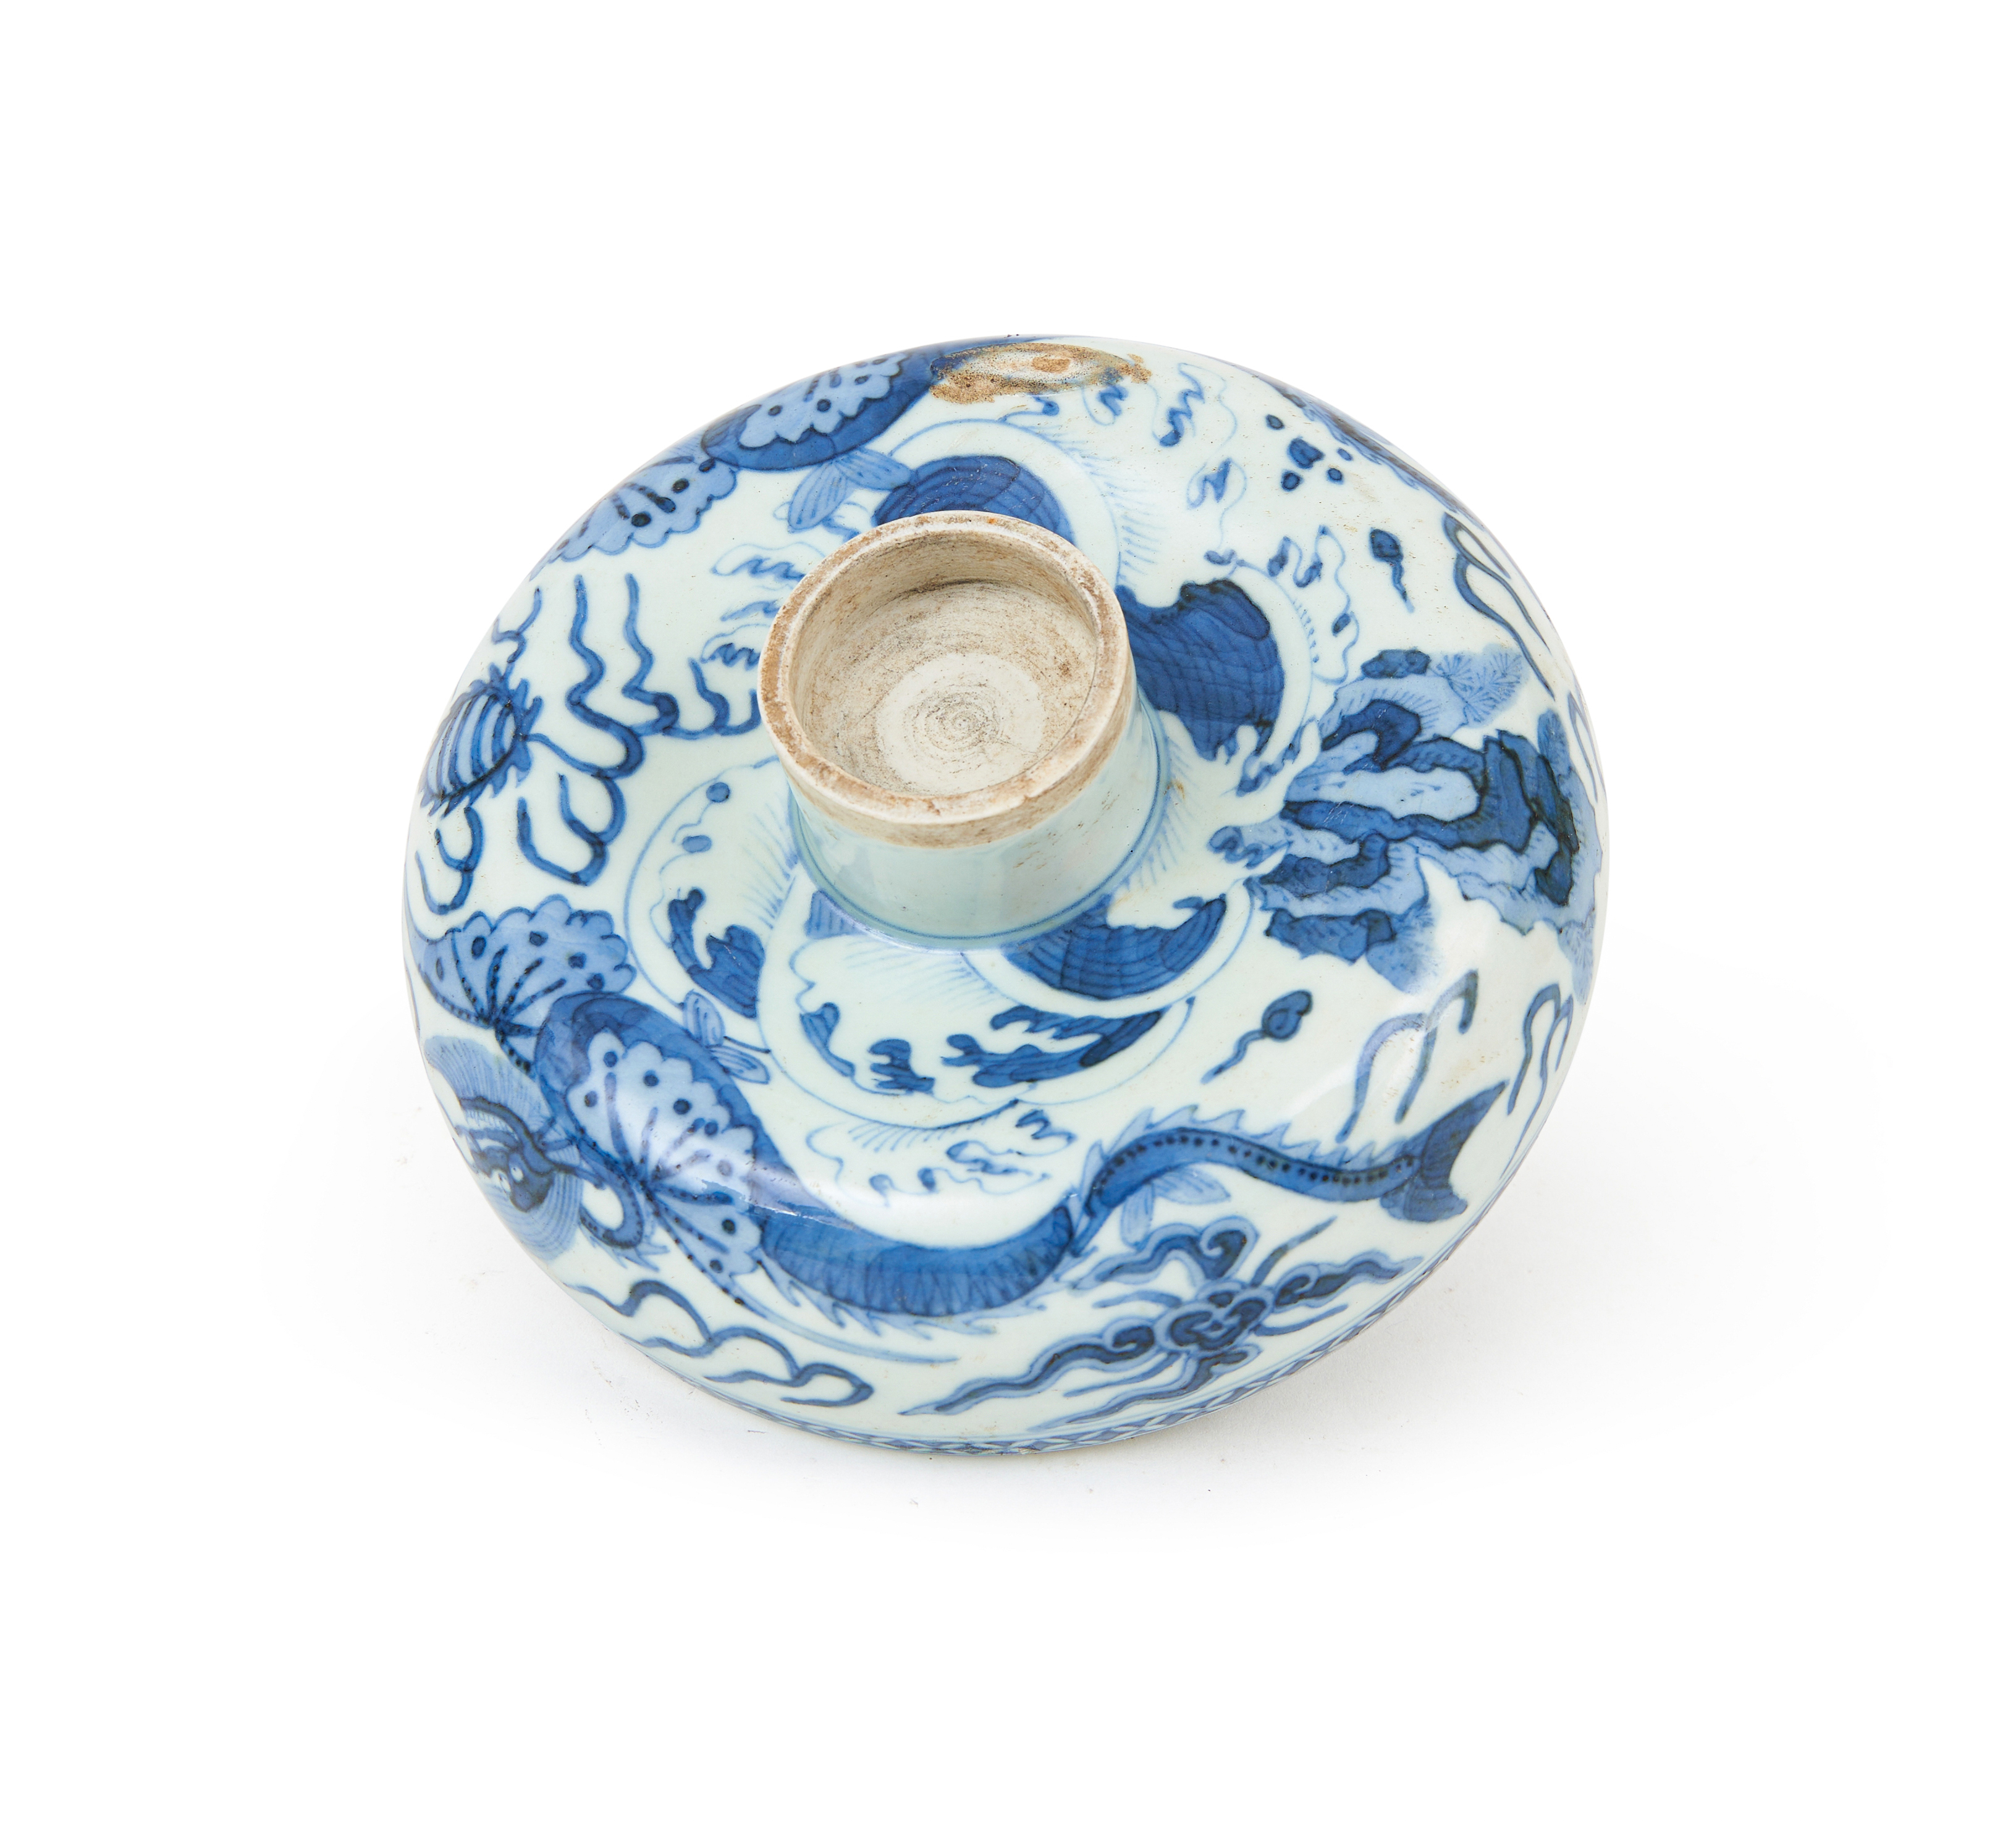 A CHIENSE BLUE & WHITE LID, QING DYNASTY (1644-1911)